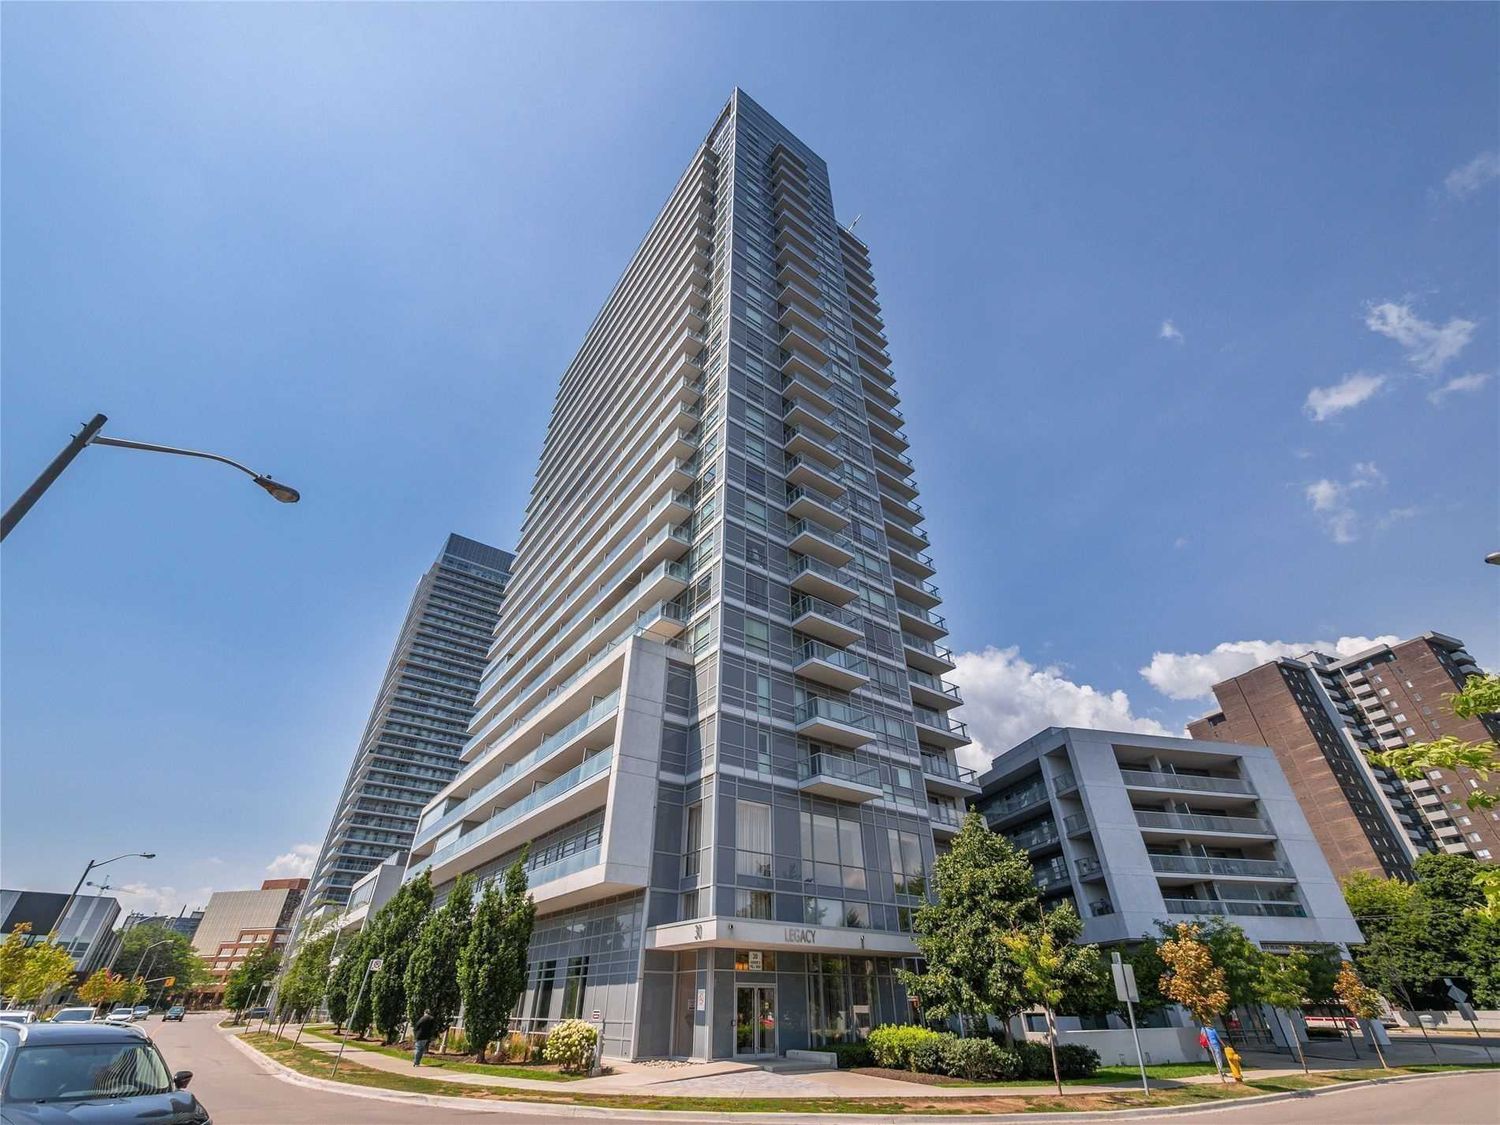 30 Heron's Hill Way. Legacy at Herons Hill Condos is located in  North York, Toronto - image #1 of 2